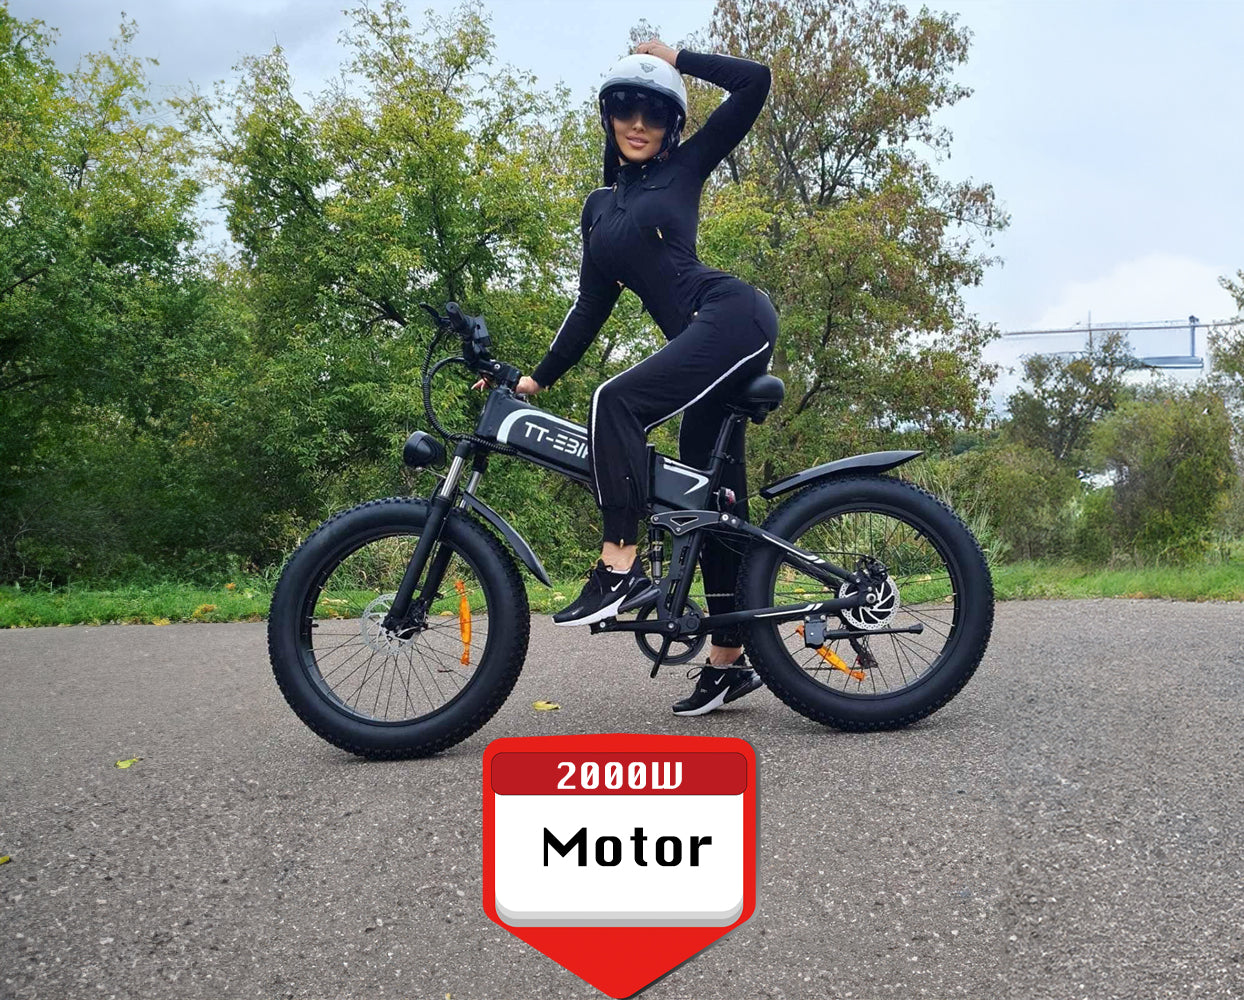 TT-EBIKE: The Ultimate Folding Electric Bike for Every Adventure